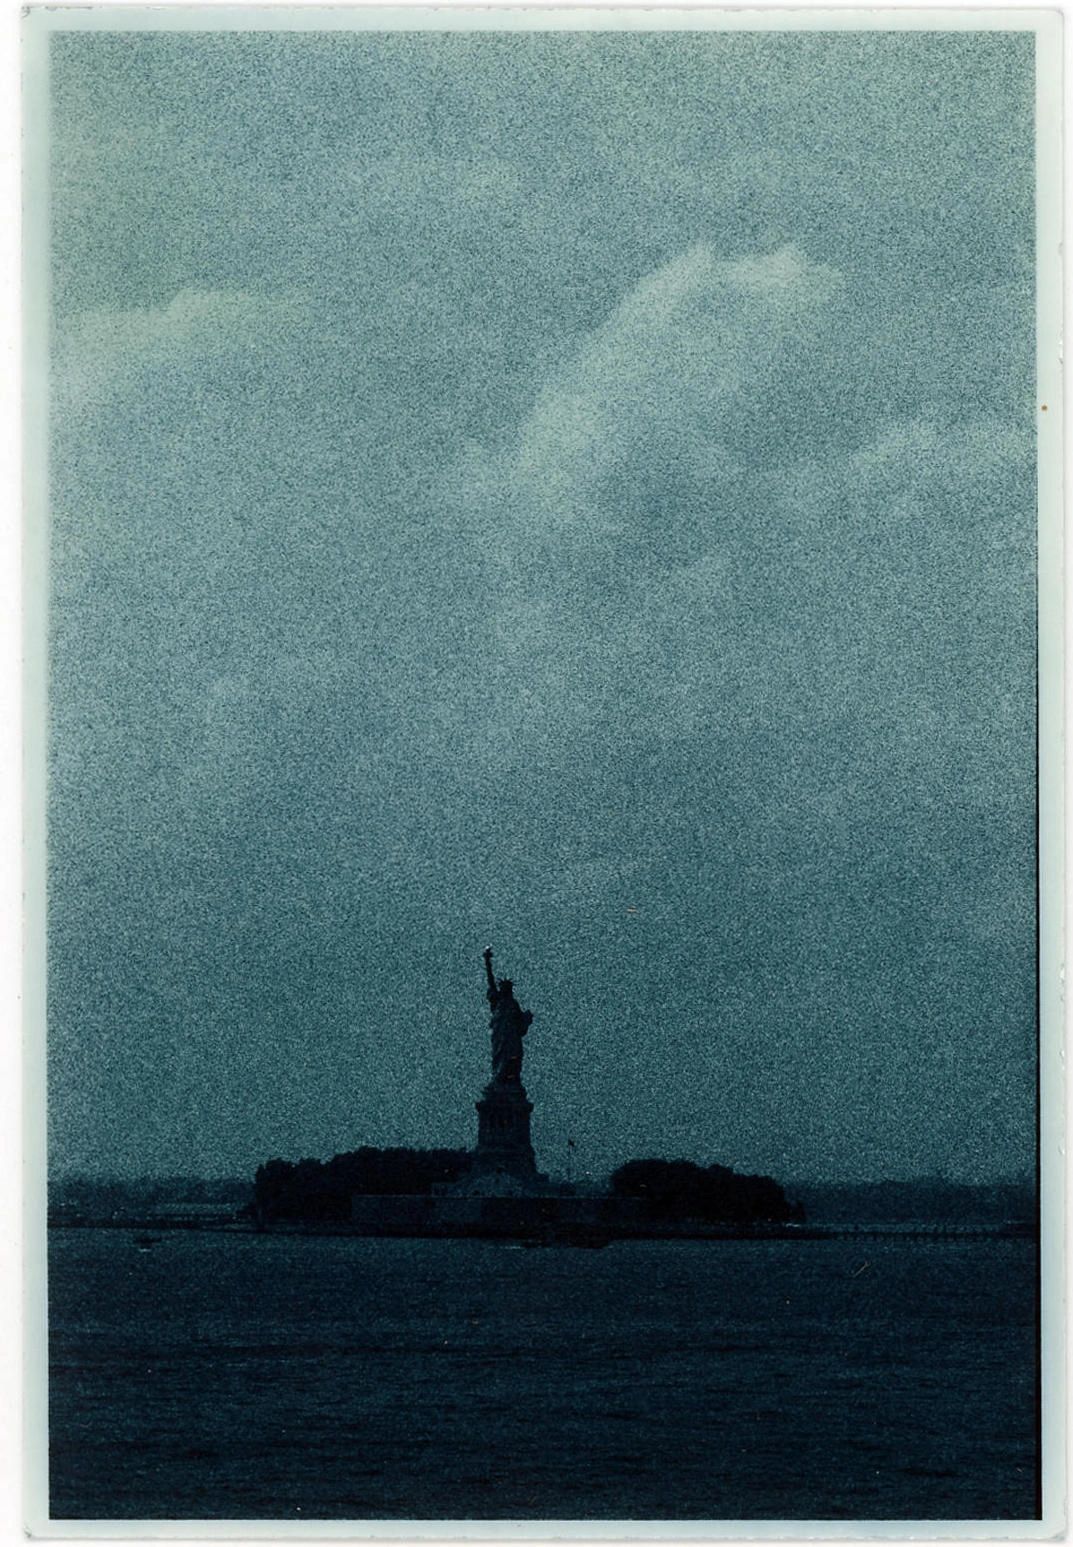 Ernesto Esquer, 'America In Blue,' 2017 signed, titled, dated, numbered on verso Gelatin Silver Print Paper - 3"x4.5" Edition 5 of 25. Image courtesy of the Artist.